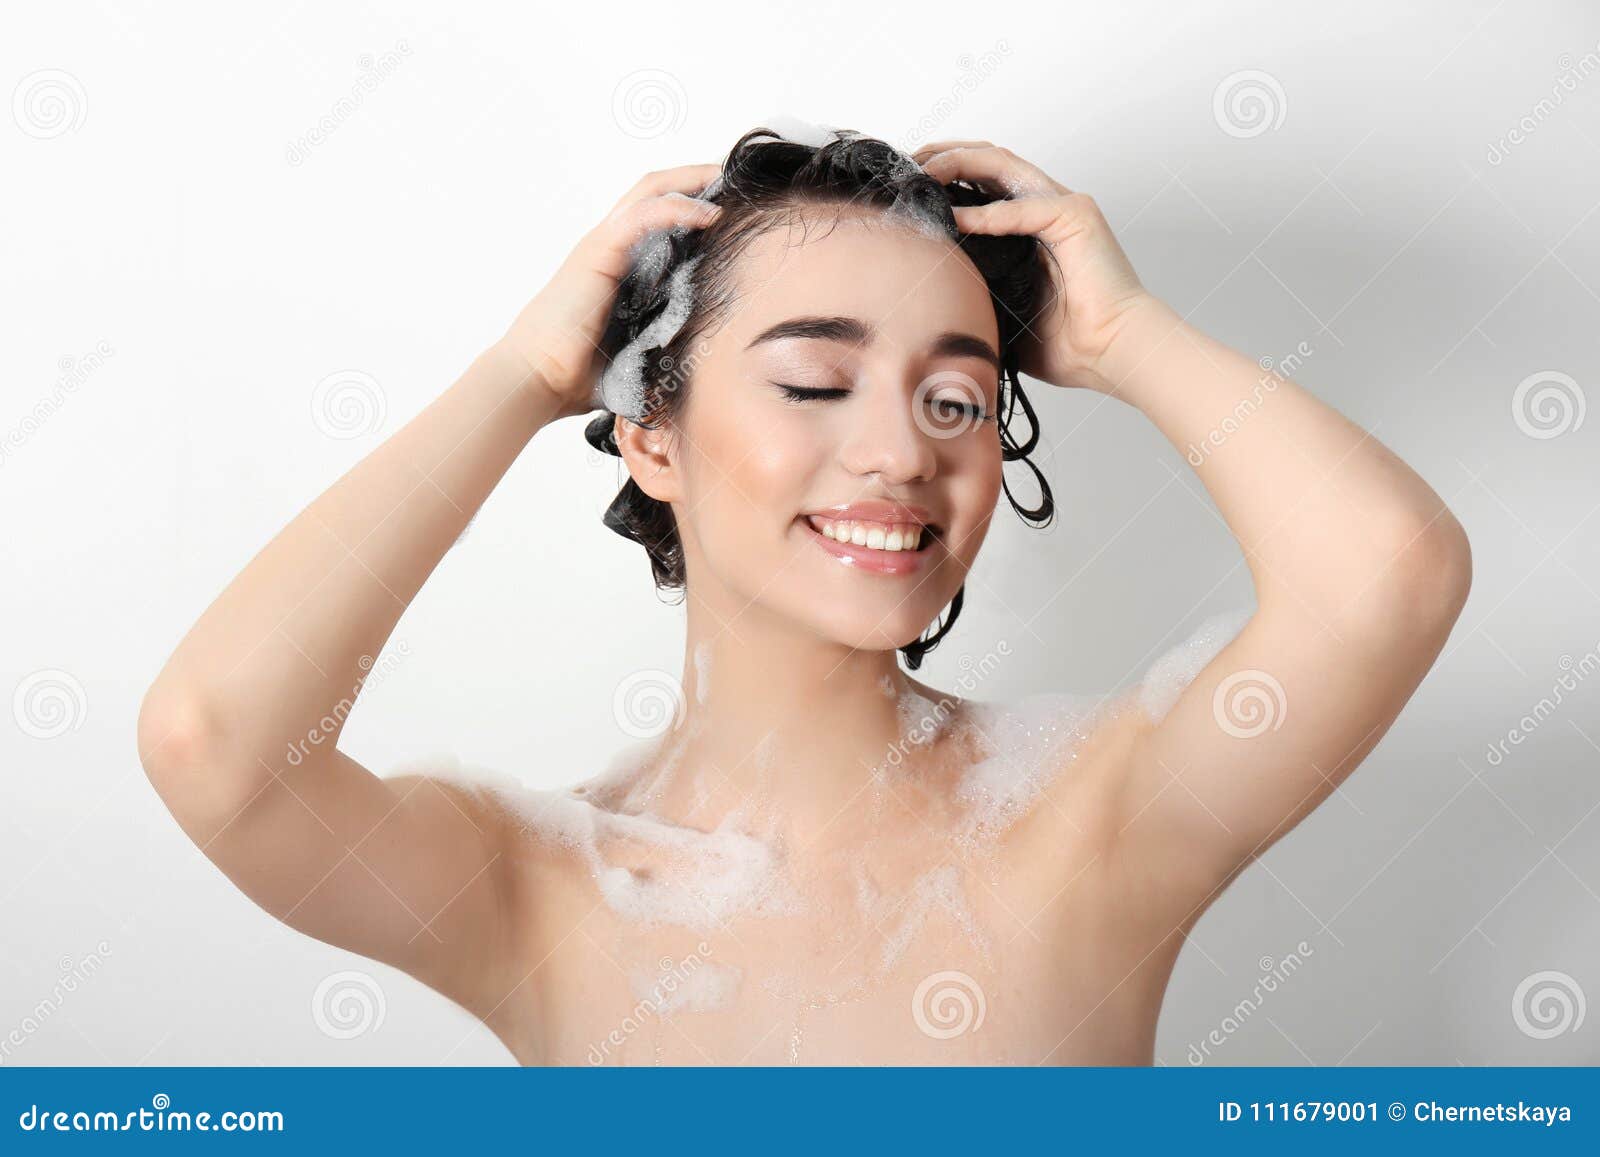 Woman Taking Shower and Washing Stock Footage Video (100% 